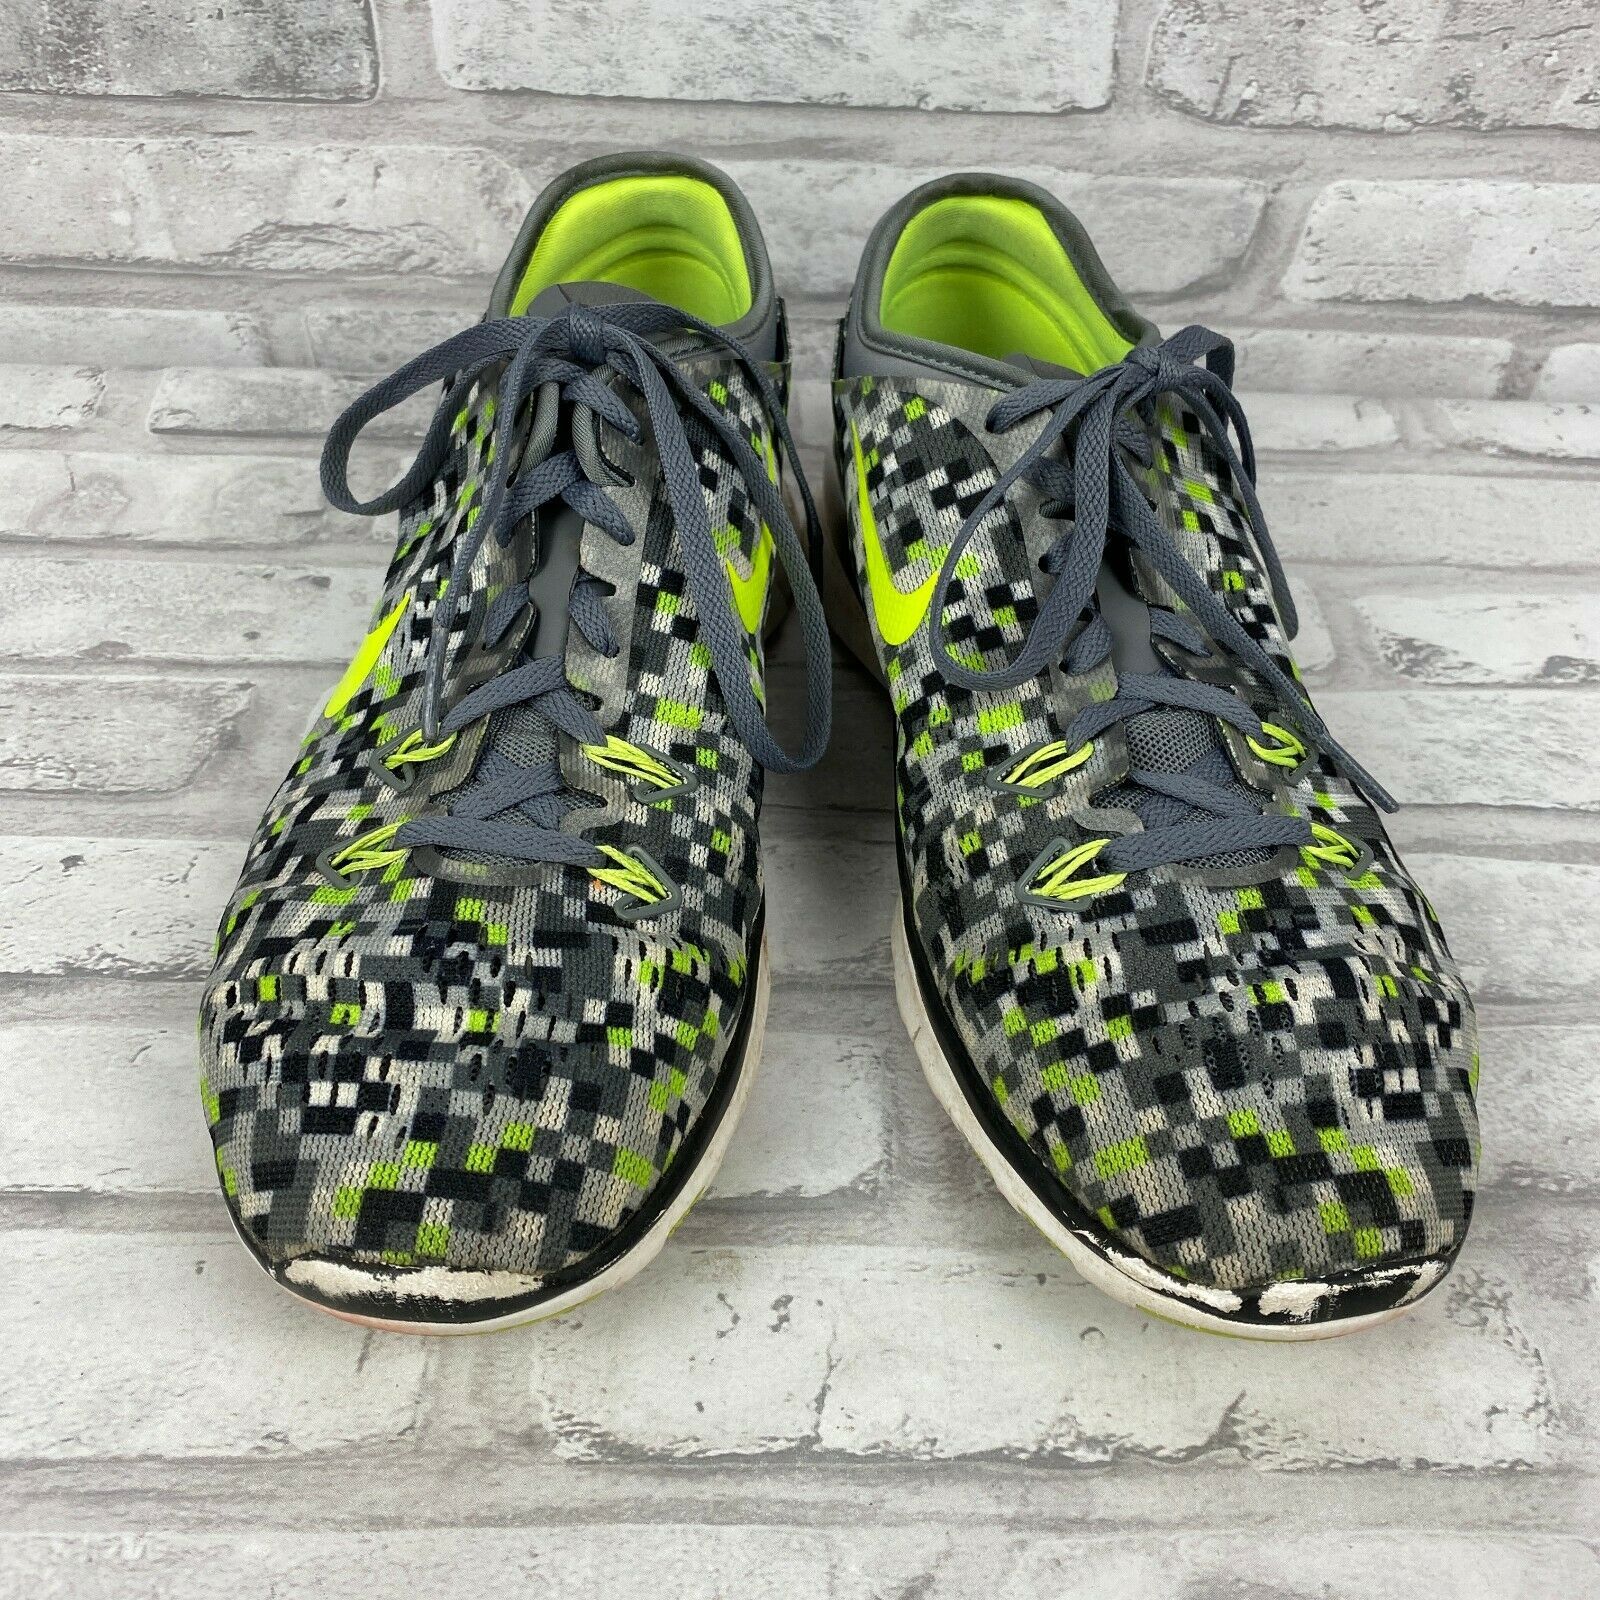 Nike Free 5.0 TR 5 Running Shoe and similar items